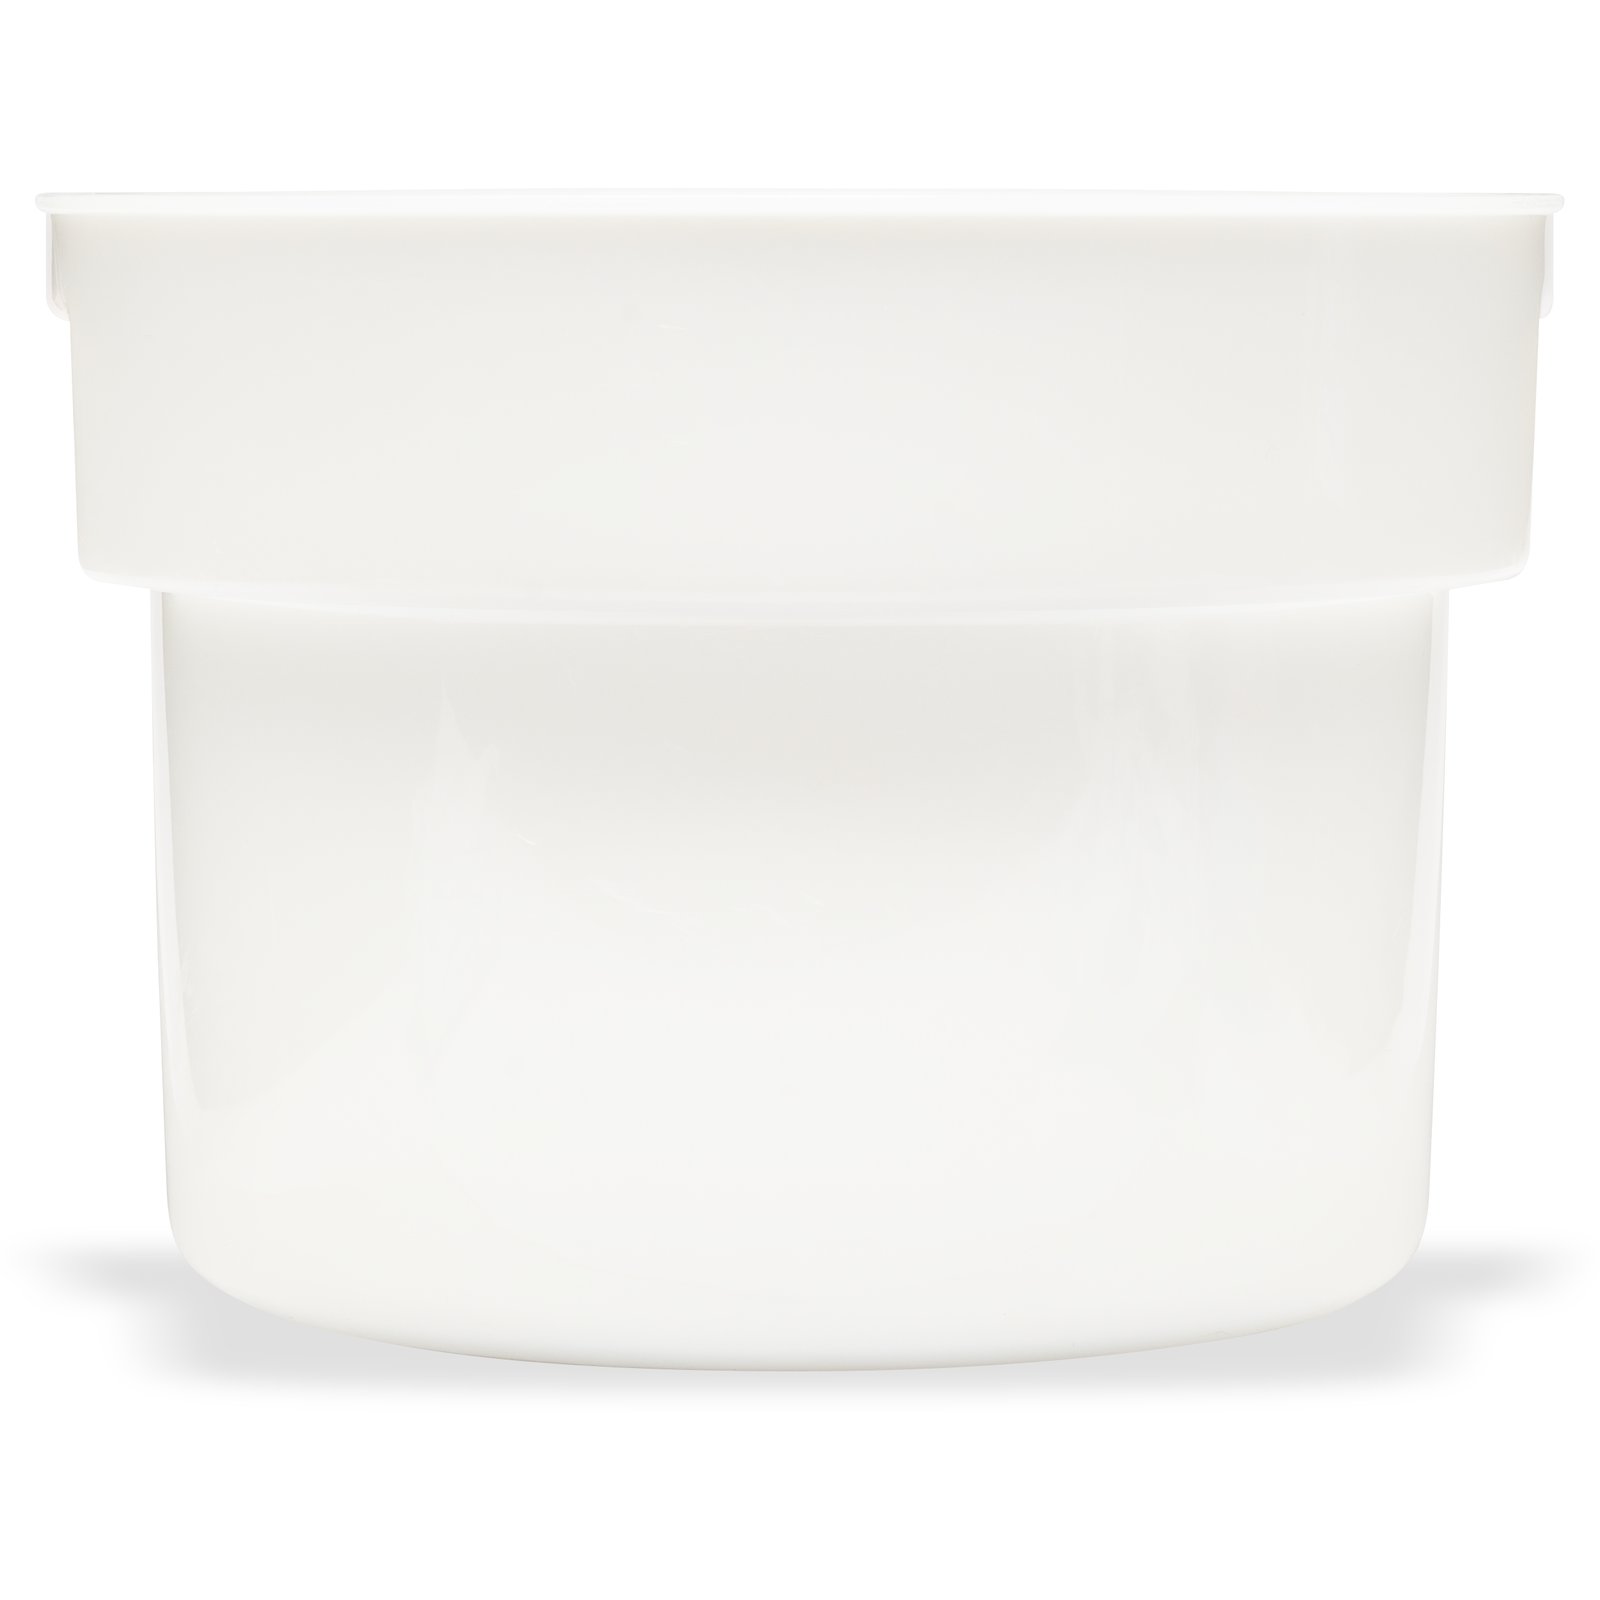 Carlisle 125230 Translucent Lid for 12, 18, 22 qt Bain Marie Container